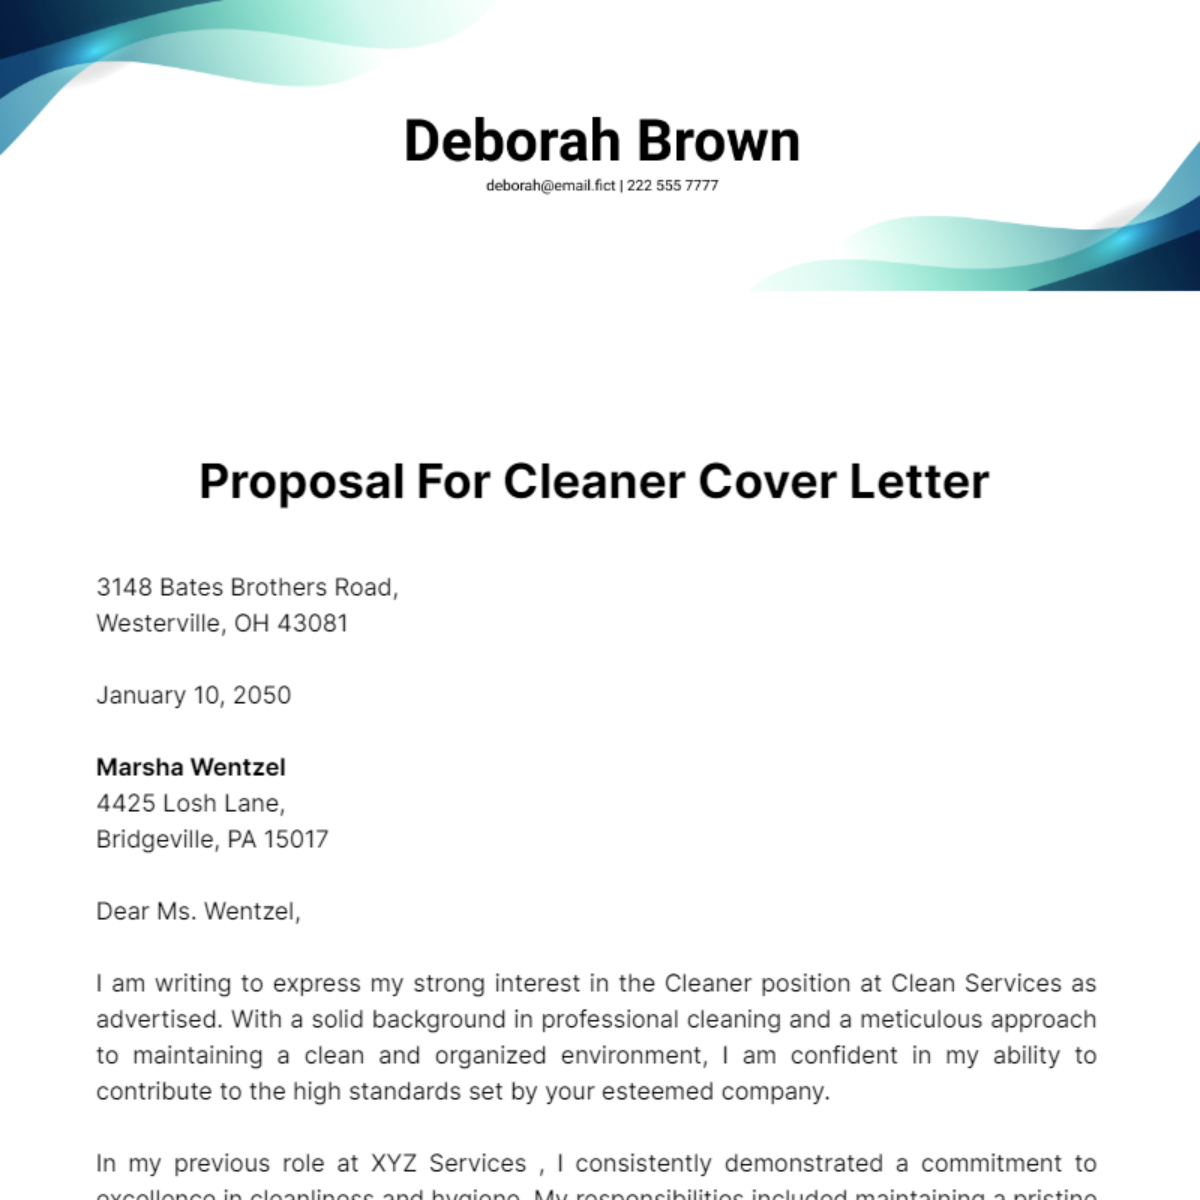 Proposal for Cleaner Cover Letter Template